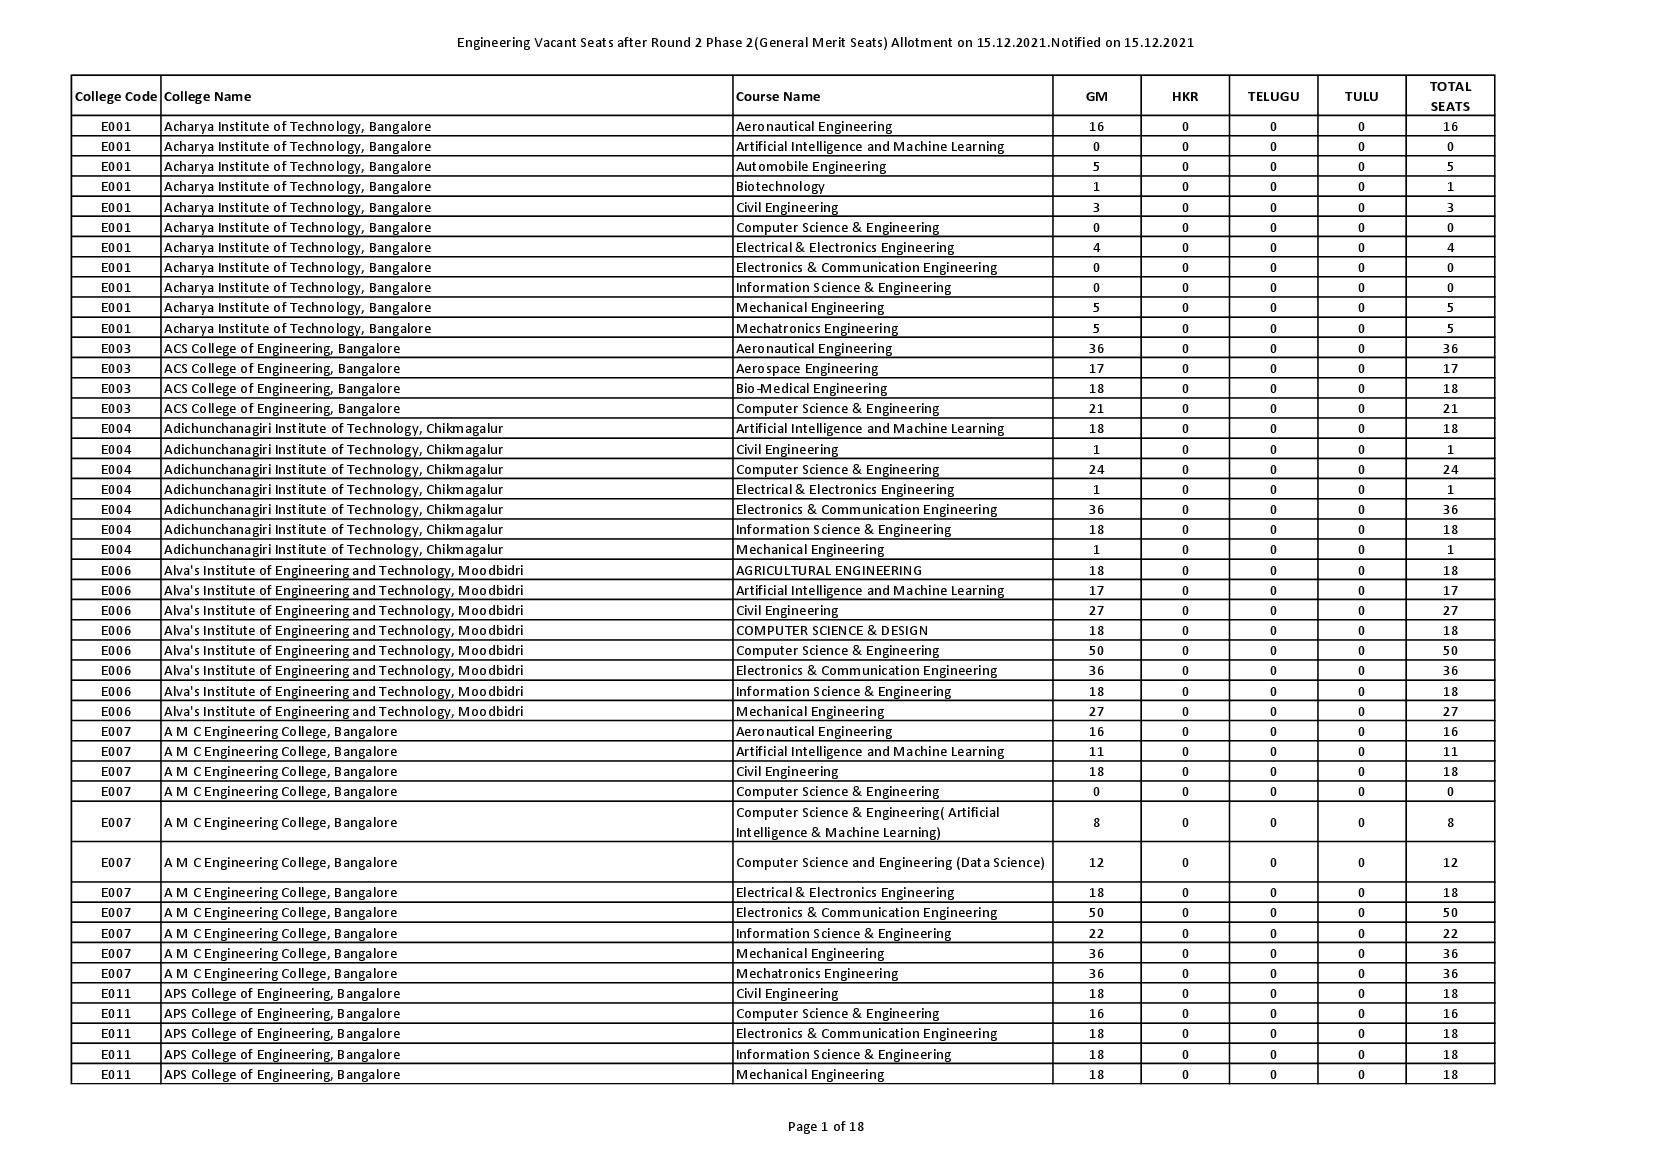 COMEDK UGET 2021 Engineering Vacant seats after Round 2, Phase 2 (General Merit Seats) - Page 1